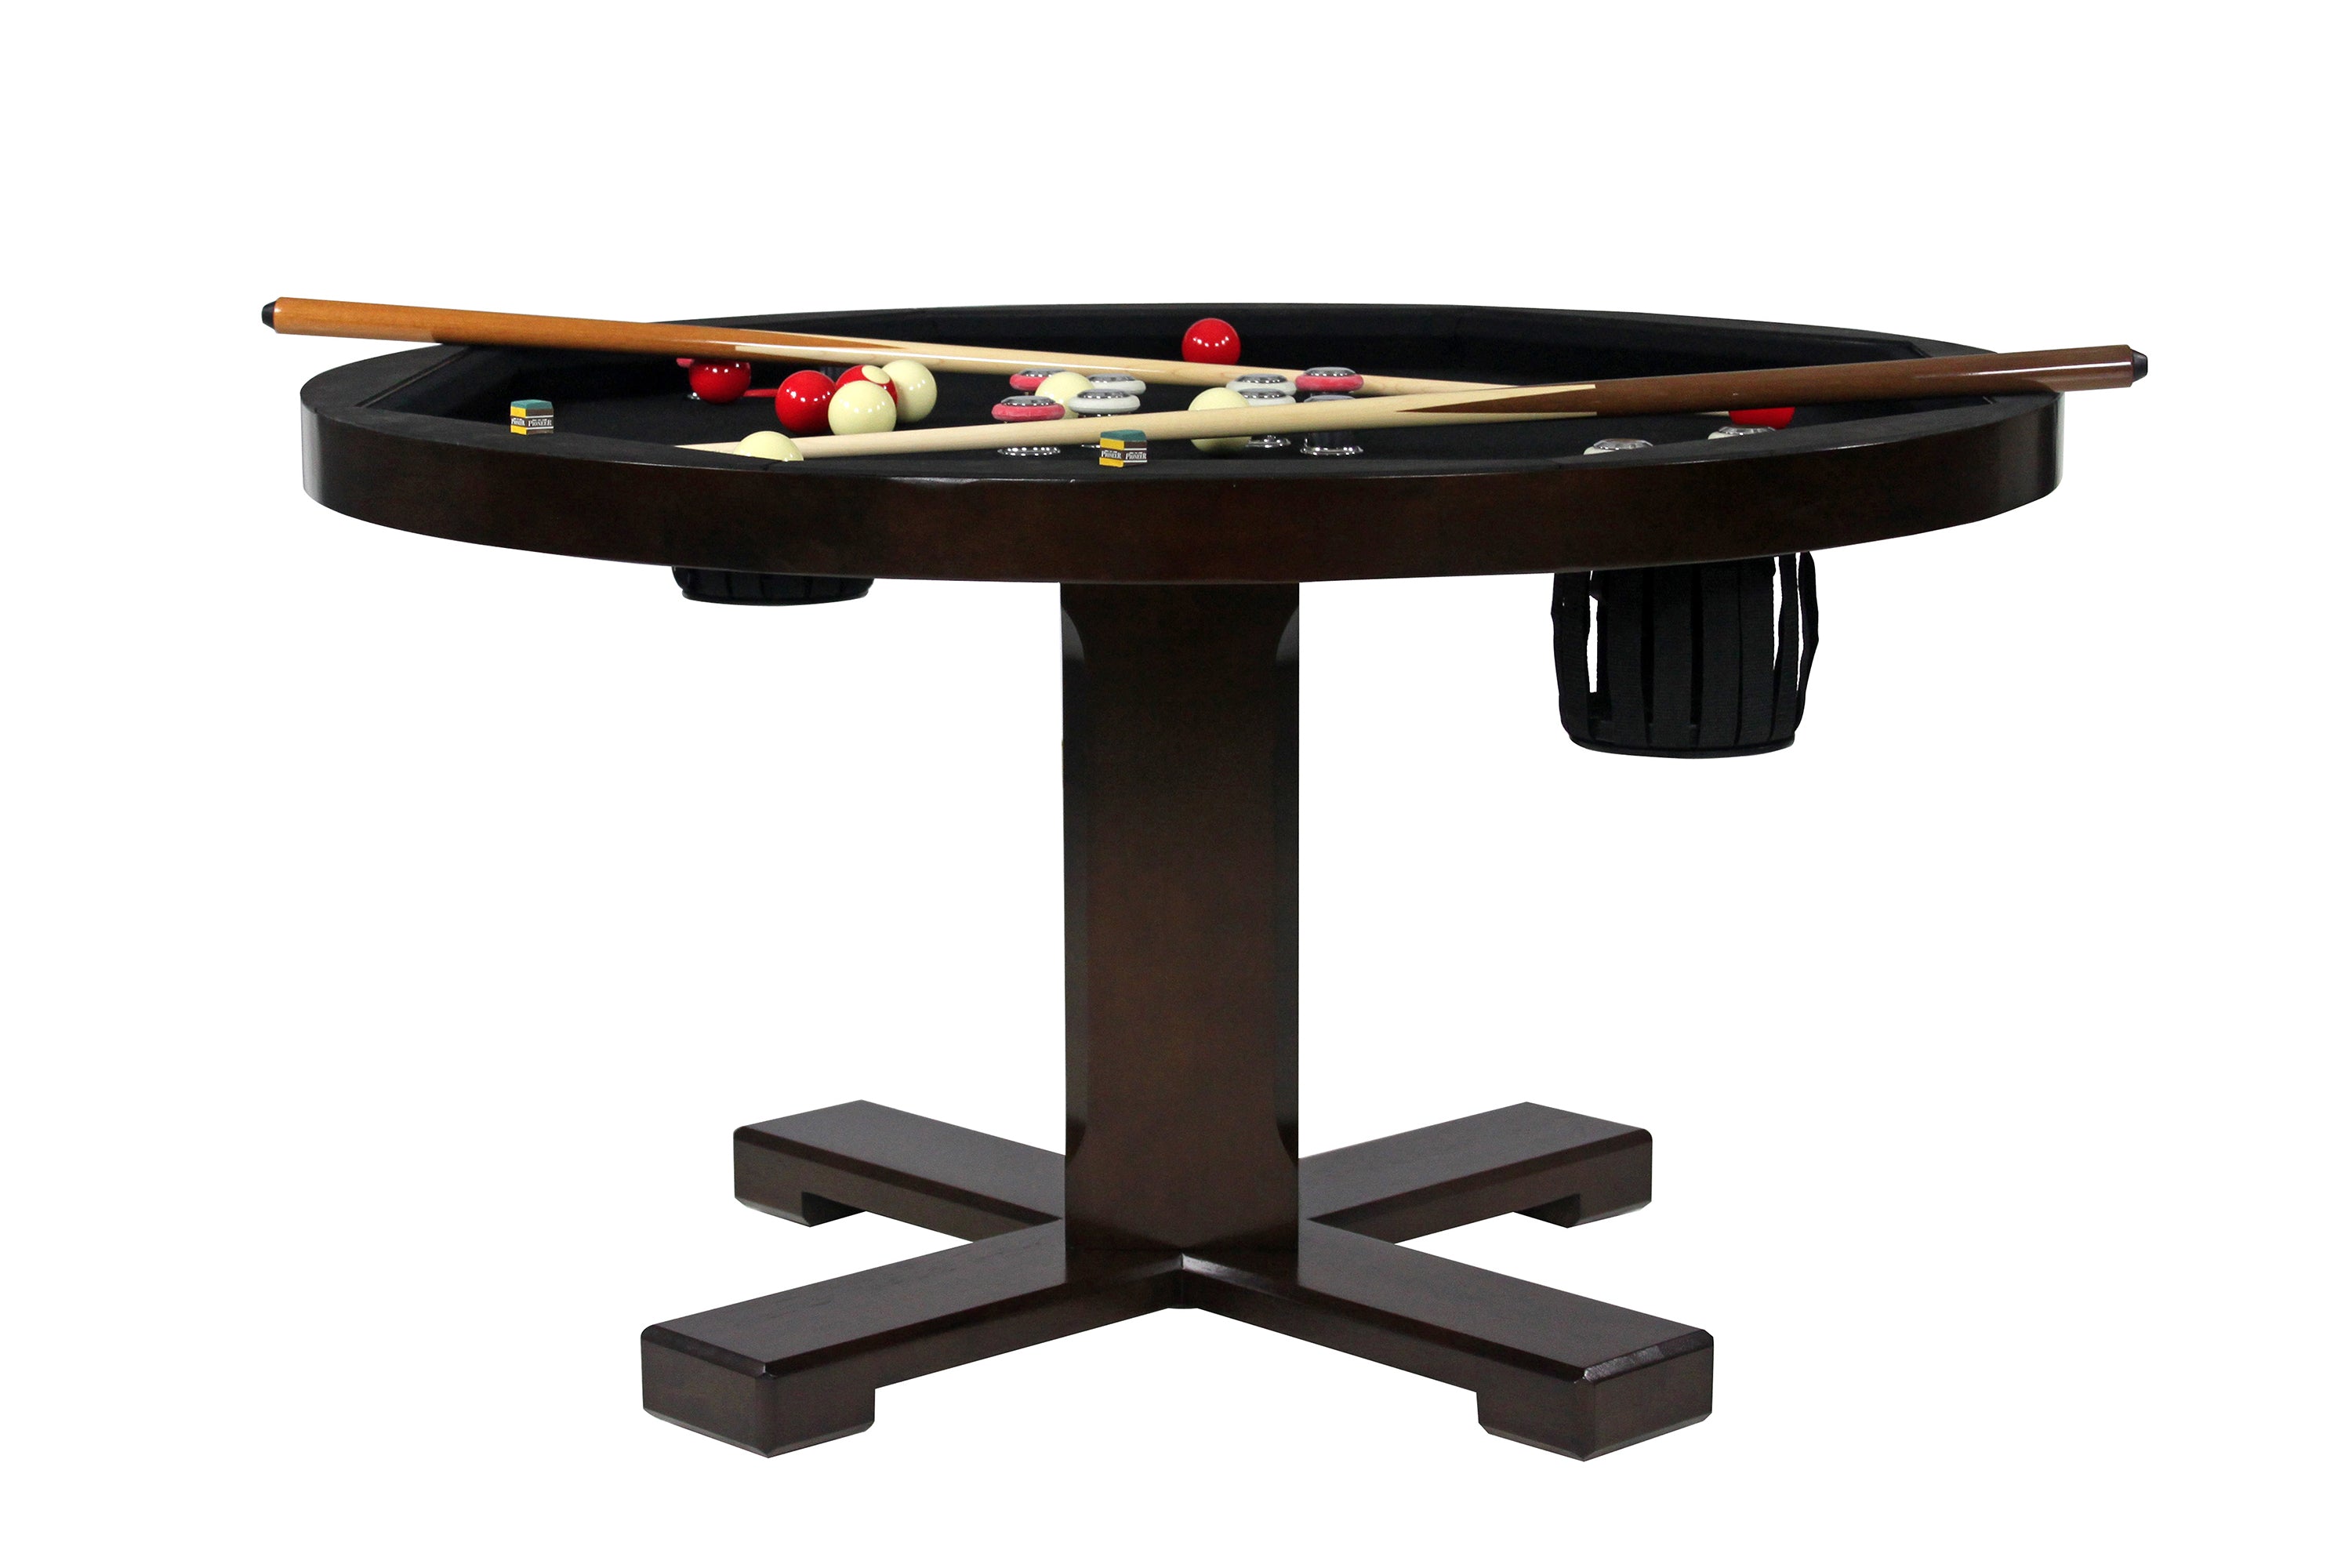 Legacy Billiards Heritage 3 in 1 Game Table with Poker, Dining and Bumper Pool in Nutmeg Finish Bumper Pool Option with Cues and Balls